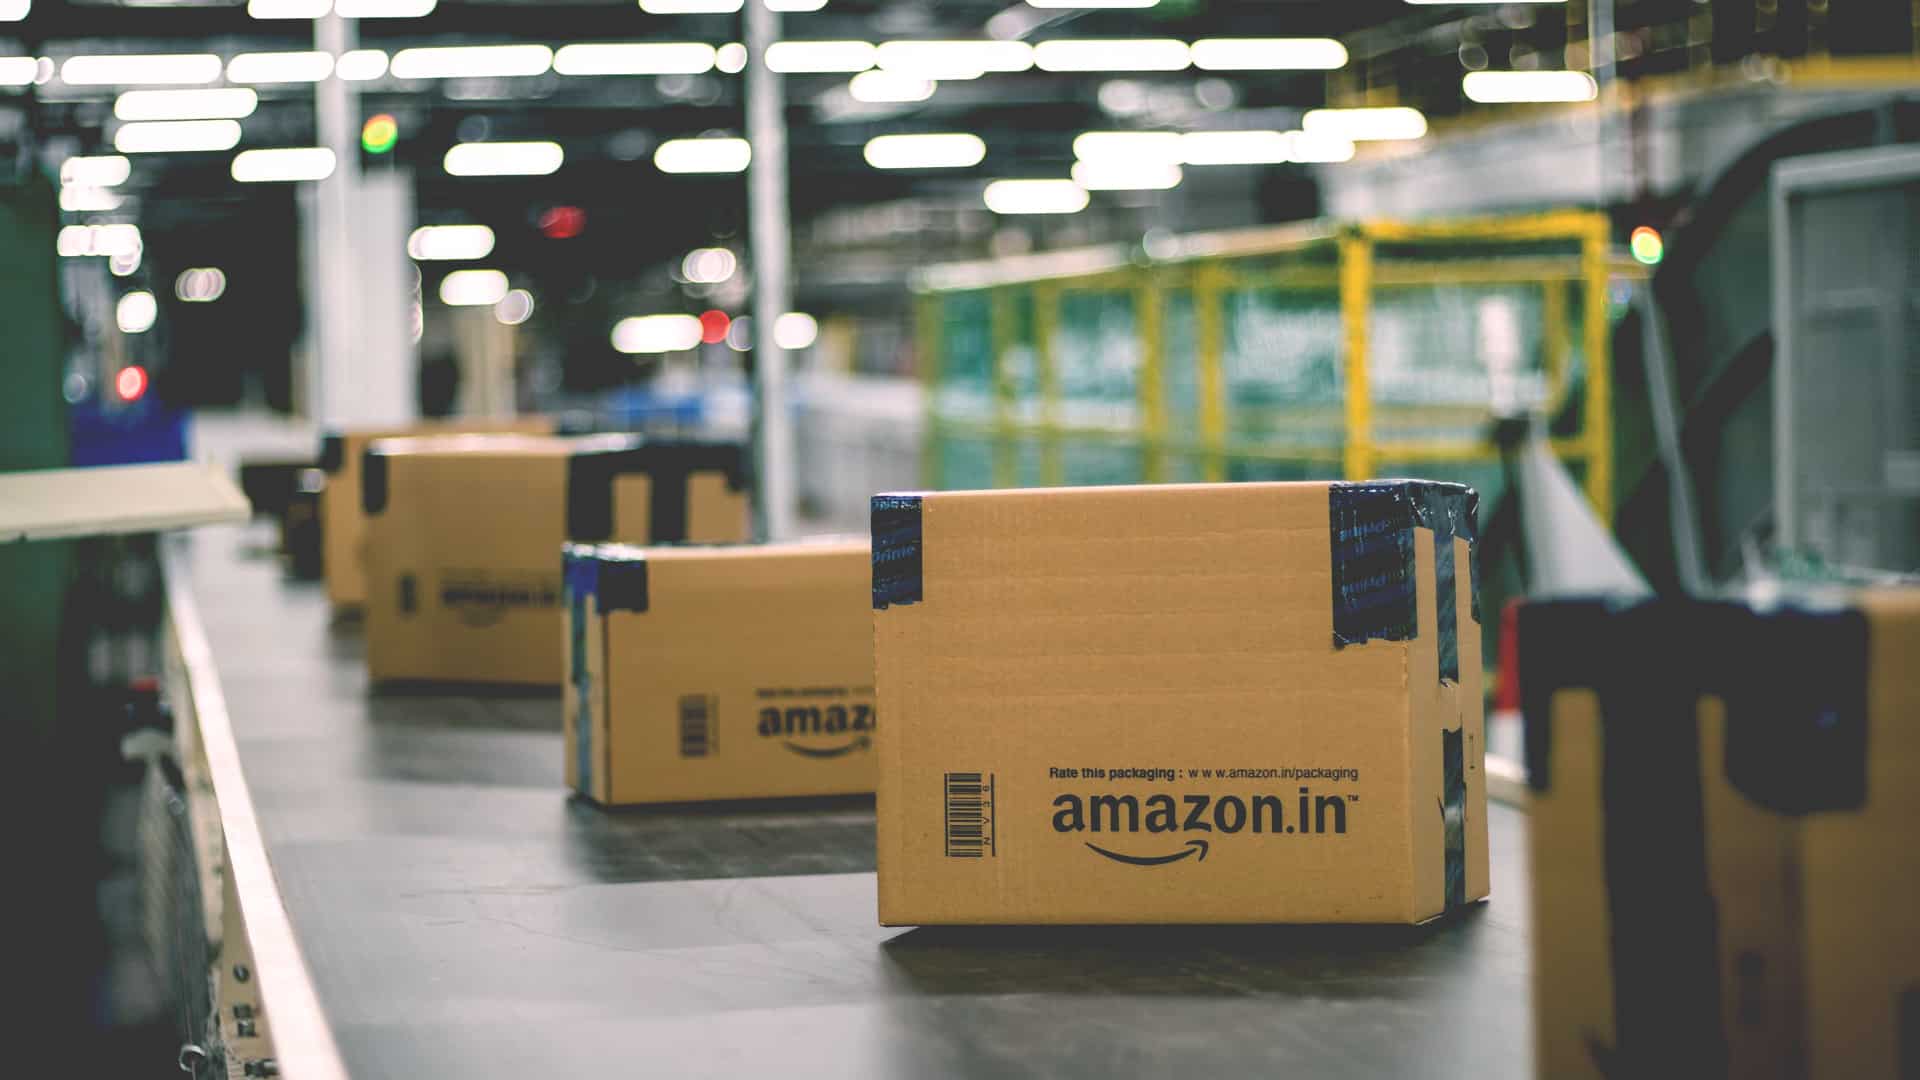 Amazon to absorb 1,000-1,200 employees from Cloudtail: Report